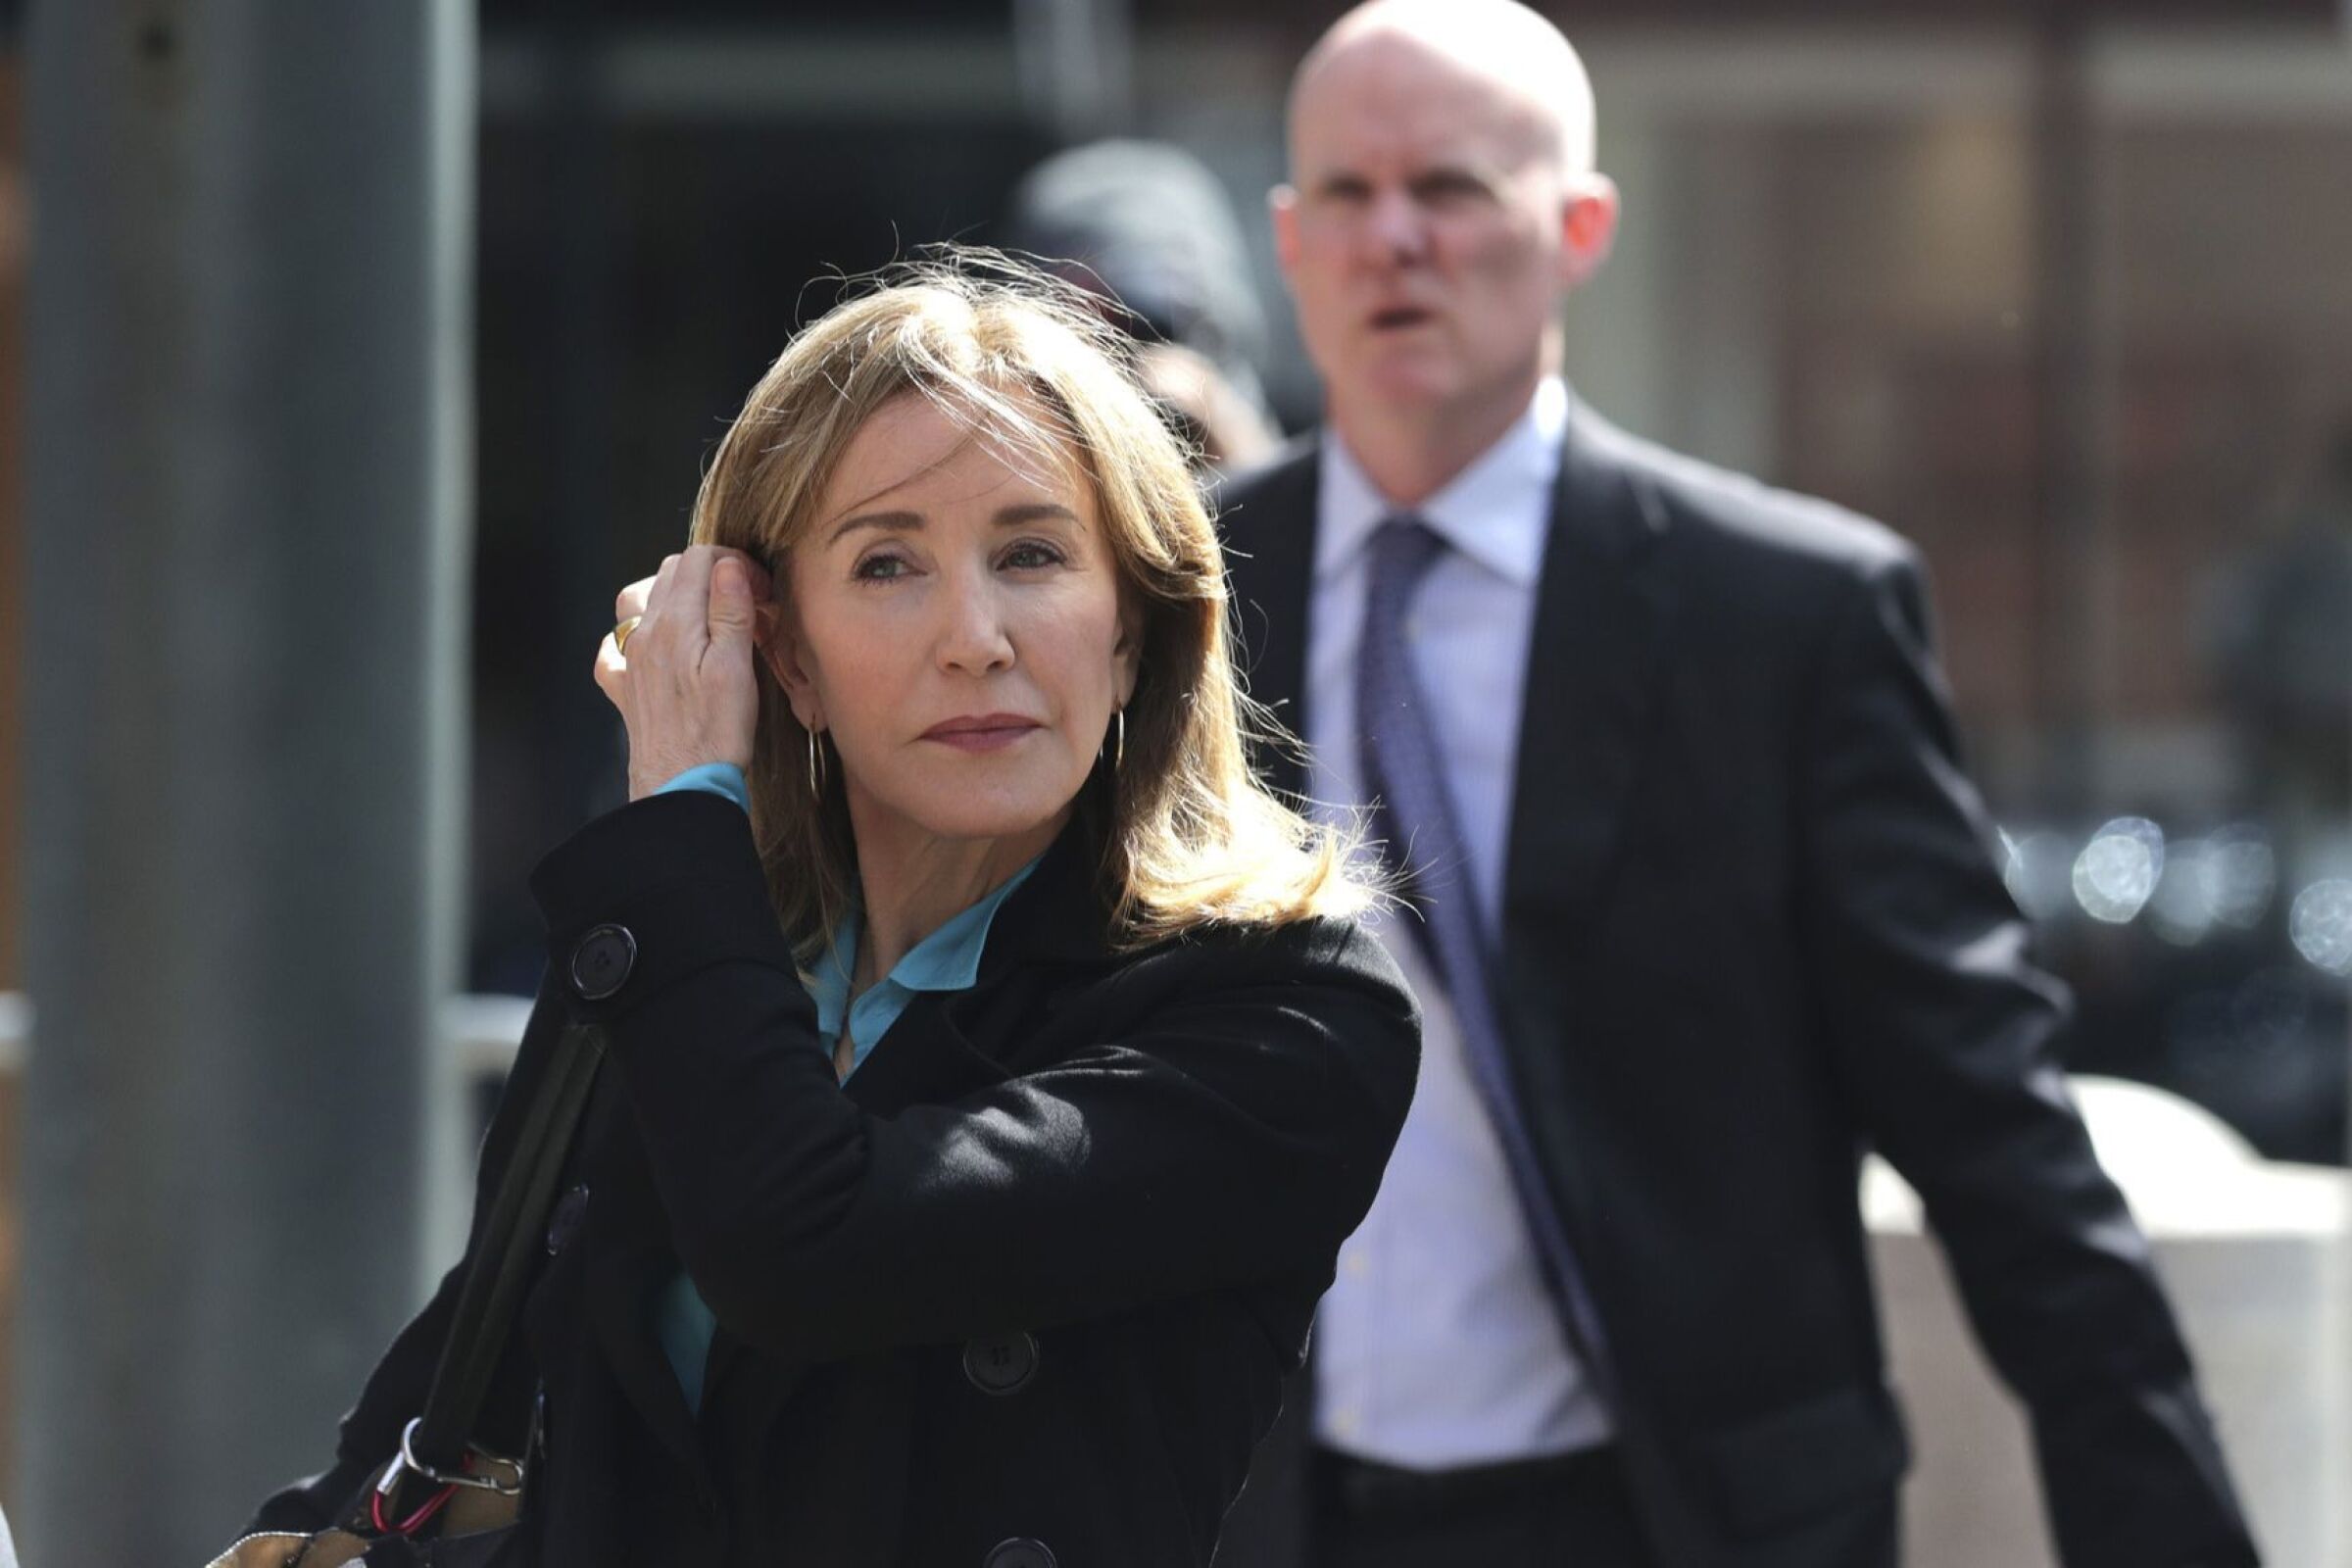 Actress Felicity Huffman arrives at federal court in Boston in April to face charges in the nationwide college admissions bribery scandal. She later pleaded guilty to a fraud conspiracy charge.